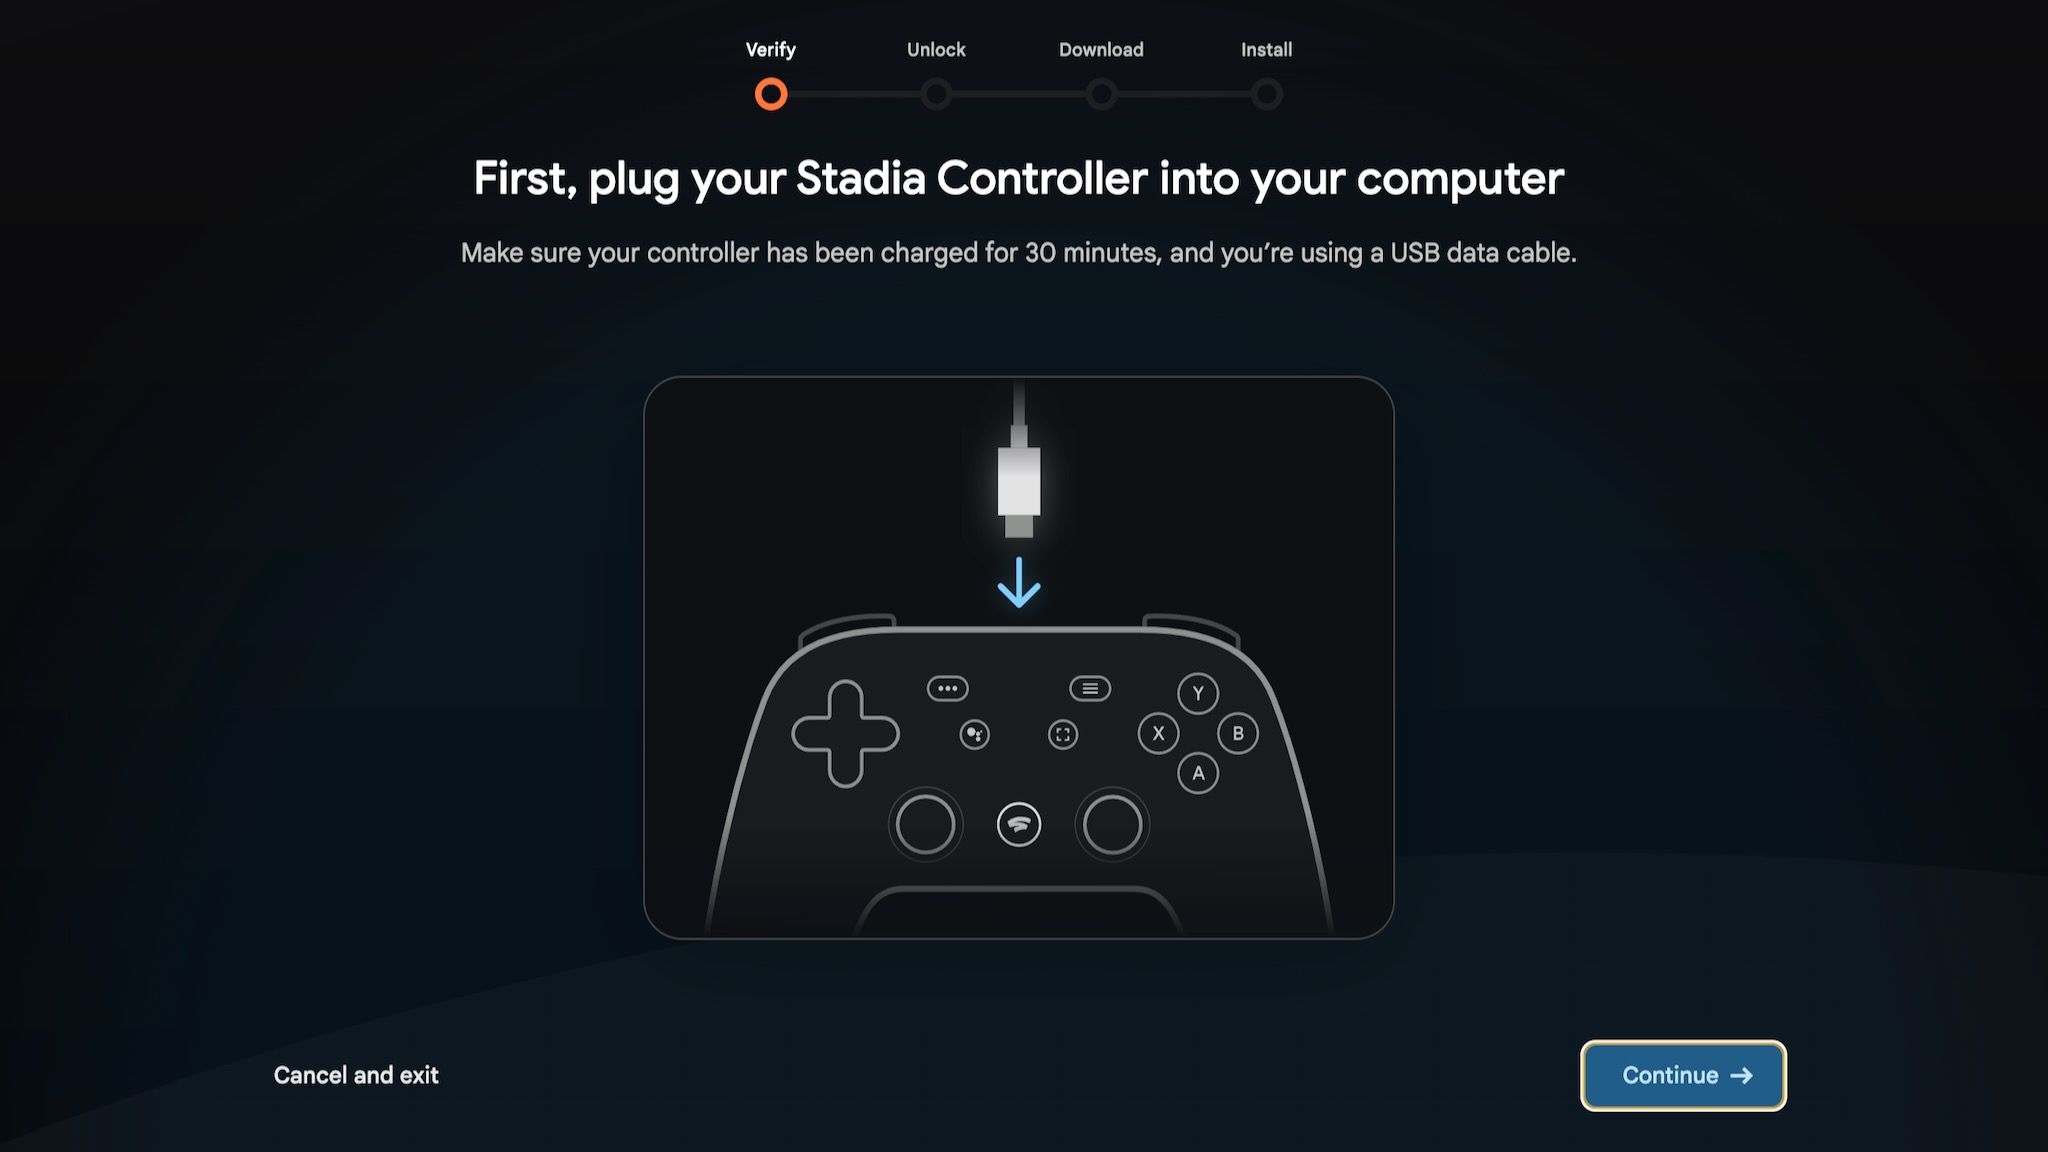 The Stadia Controller firmware browser tool: 